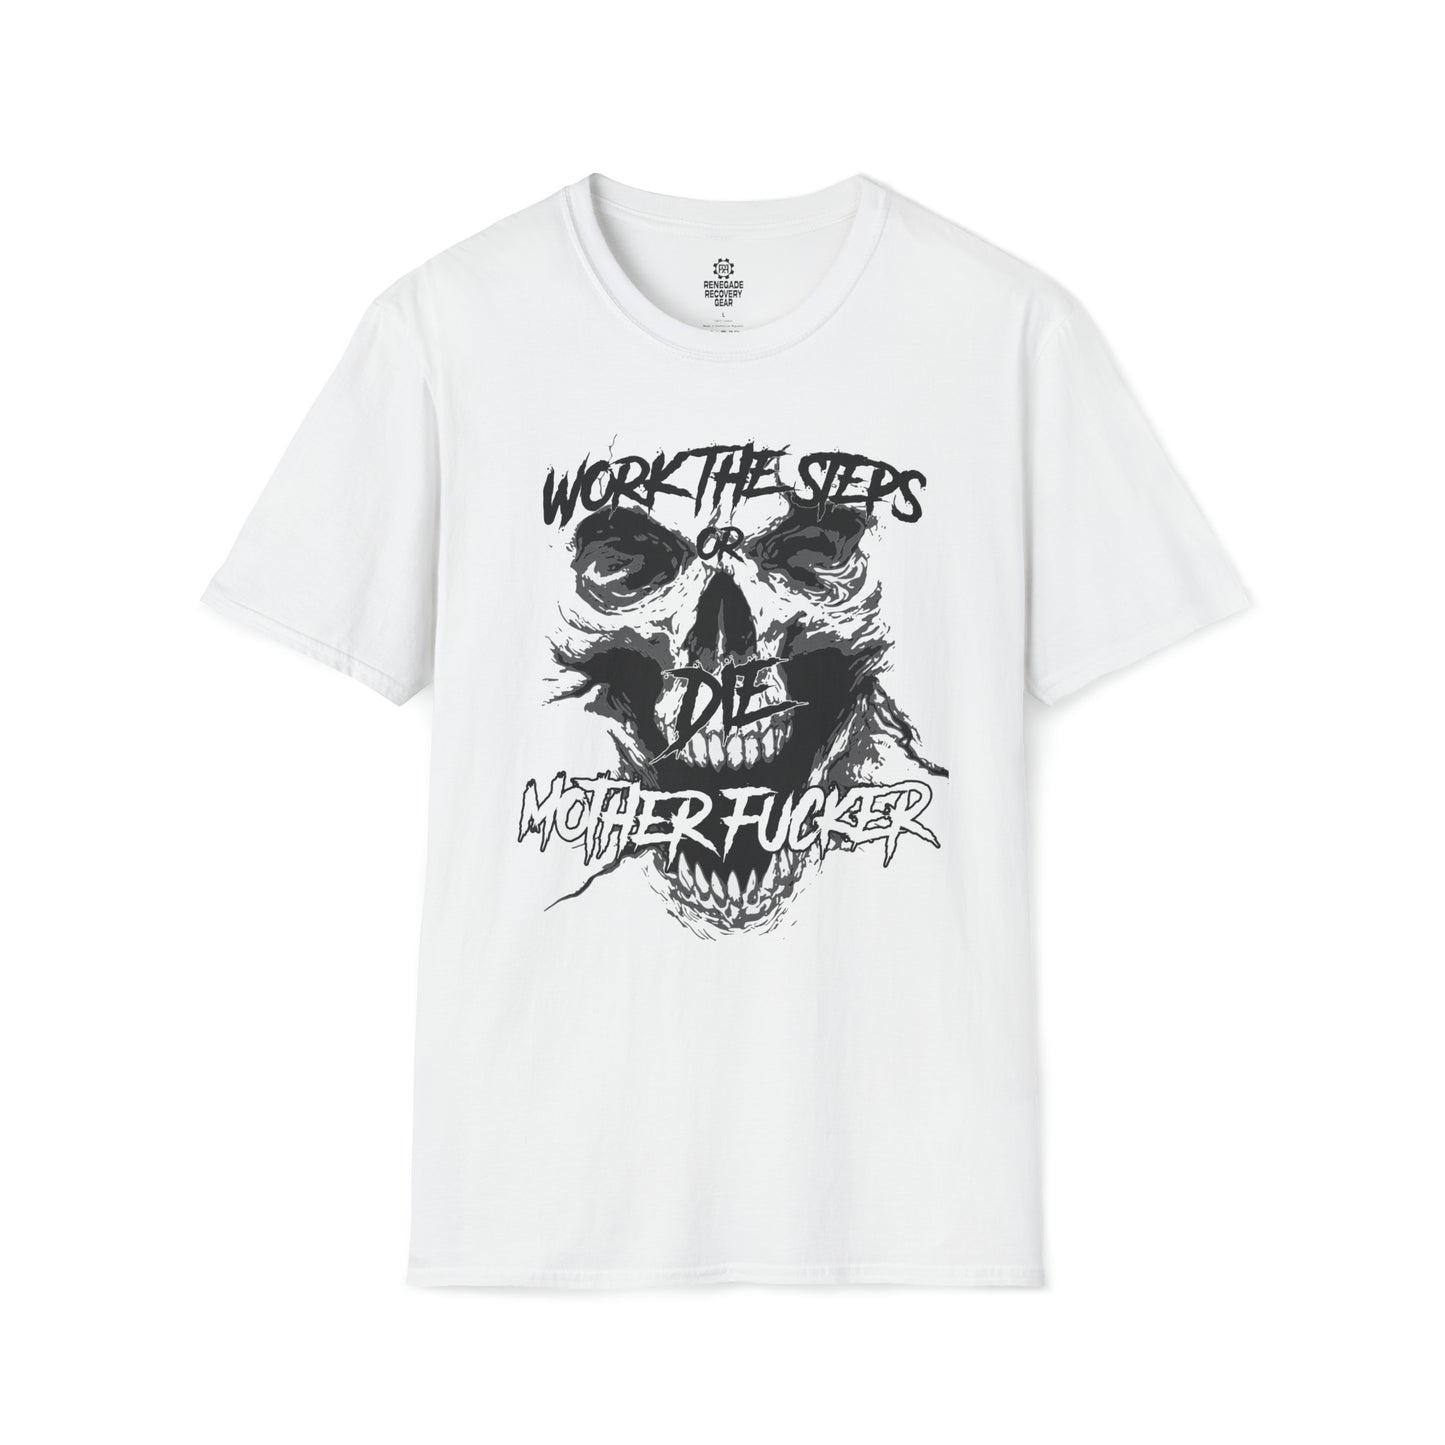 Plain white background behind a white tee shirt with a black screaming skeleton skull face with text on top that says "WORK THE STEPS OR DIE MOTHERFUCKER"